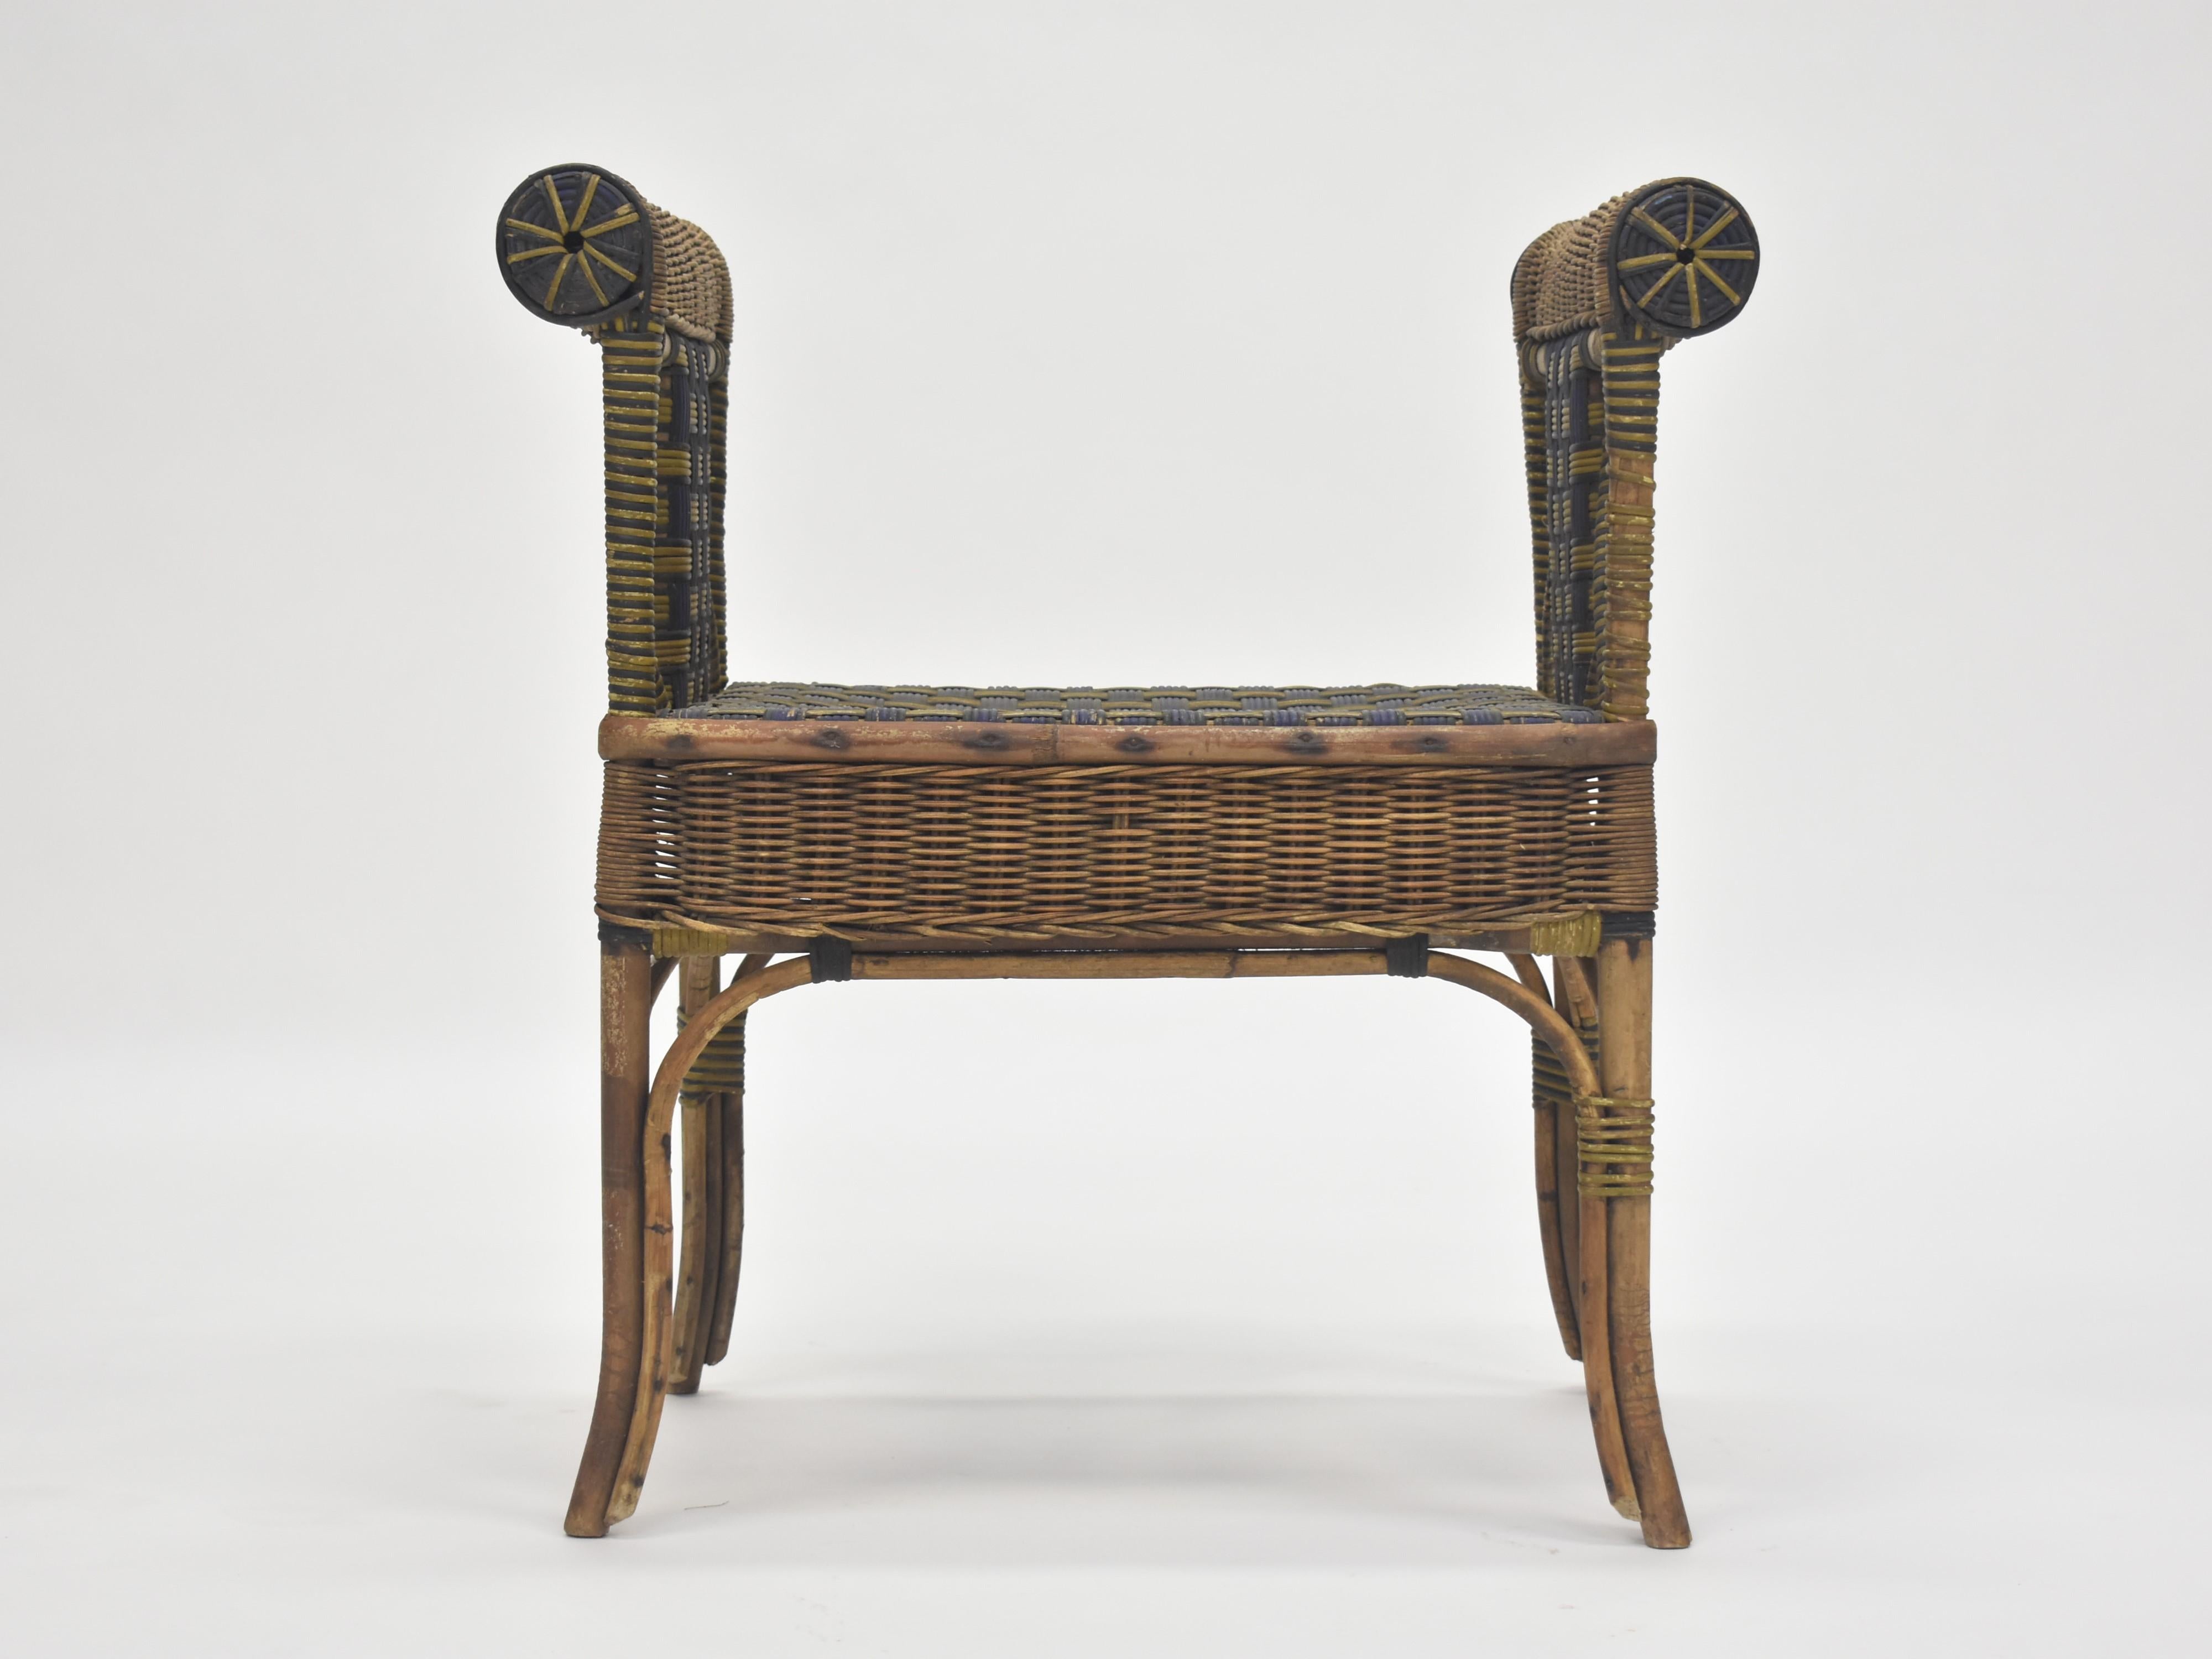 Egyptian Revival Vintage Wicker Scroll Arm Stool For Sale